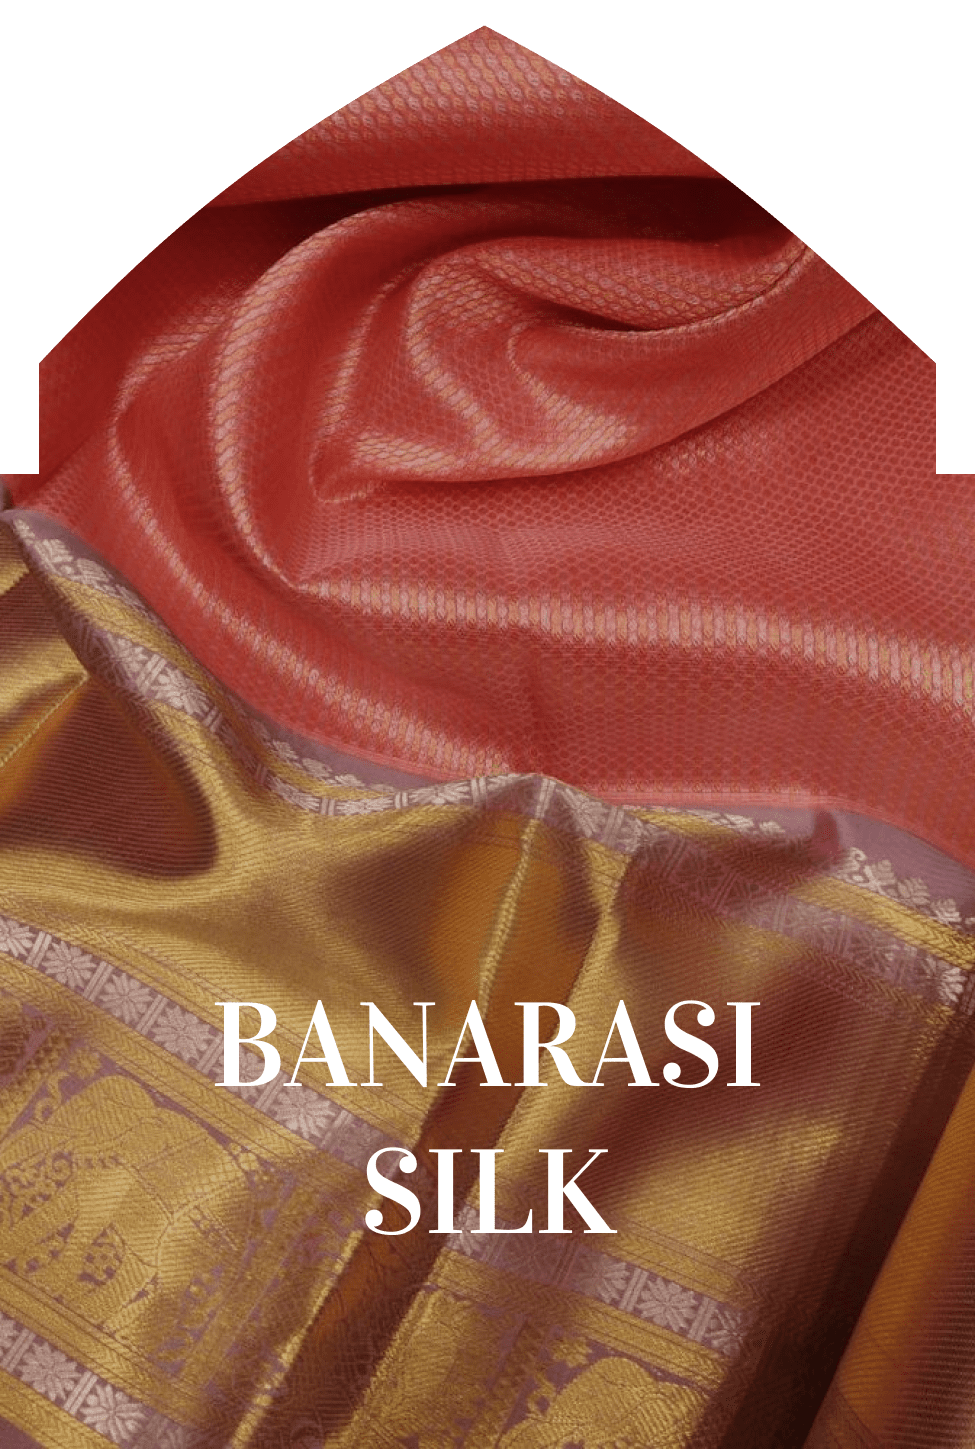 A beautiful Banarasi silk saree with intricate designs and vibrant colors. Perfect for special occasions.